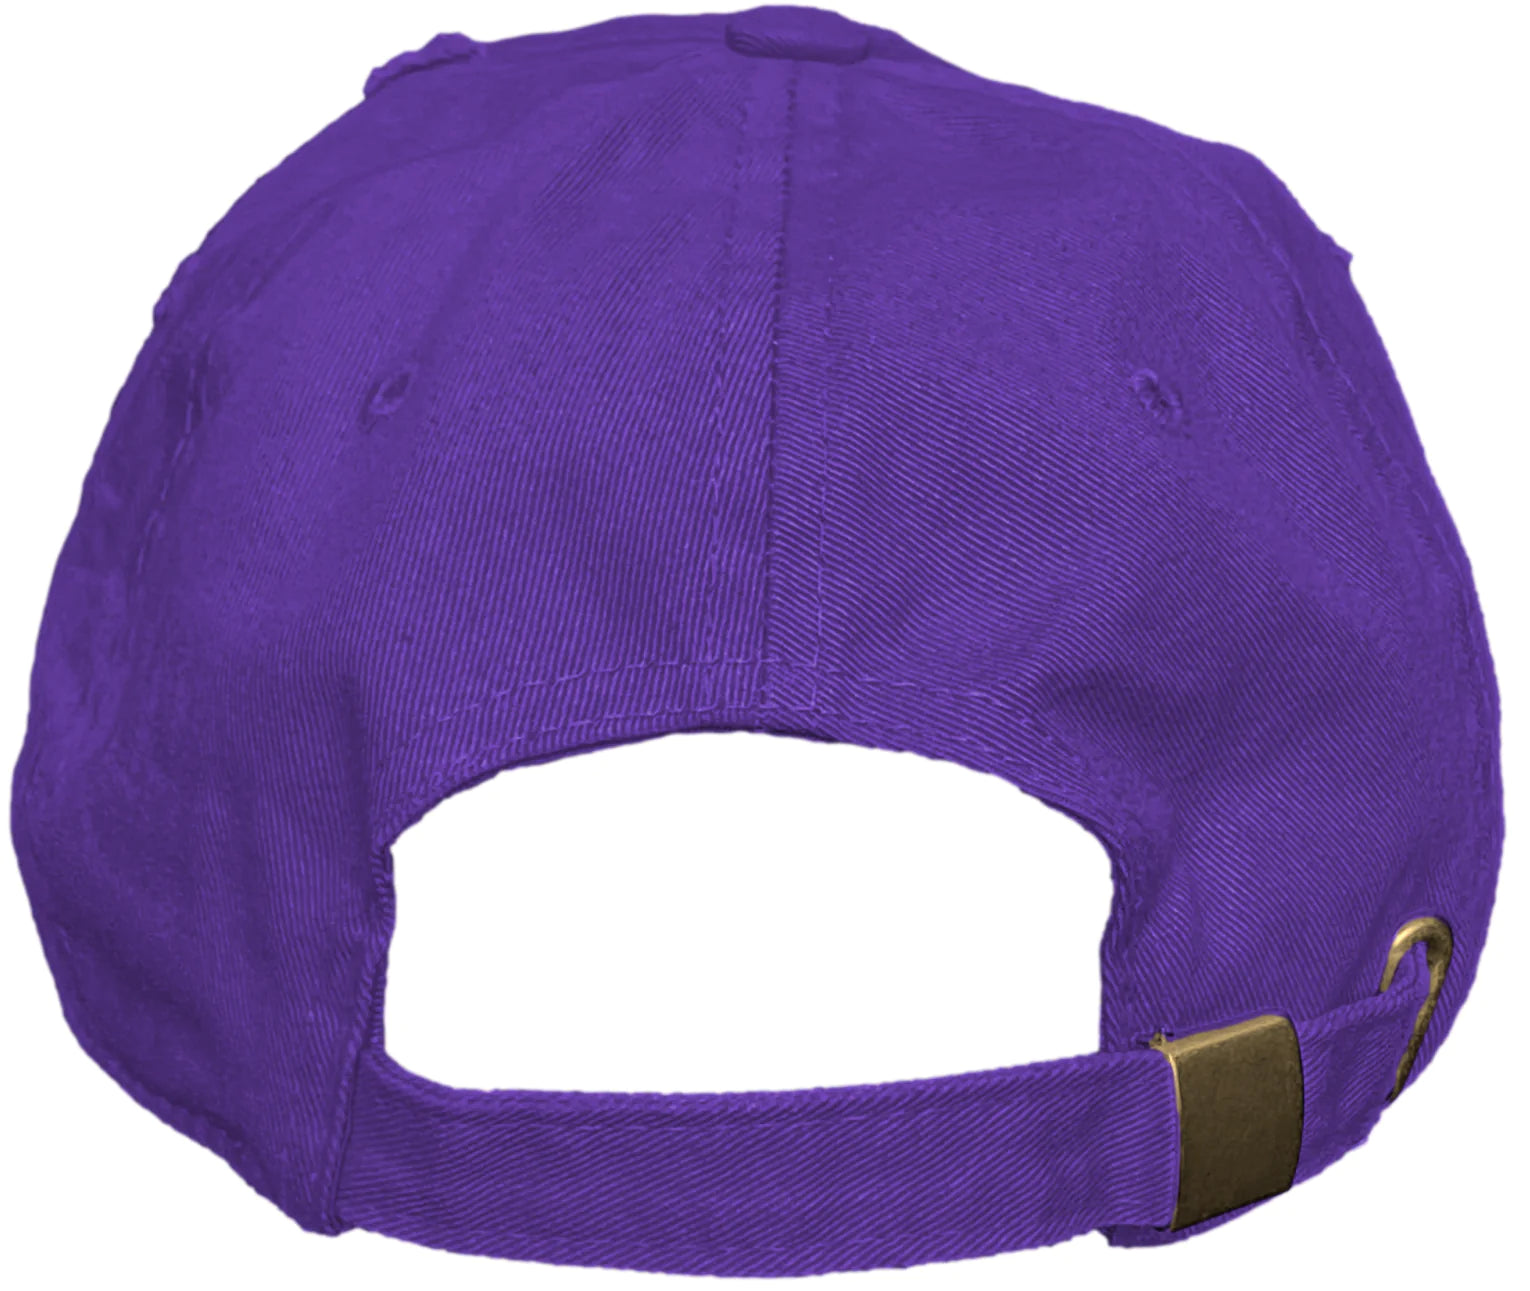 Crazy Baws : Purple Dad Hat : Sneaker Hats to Match